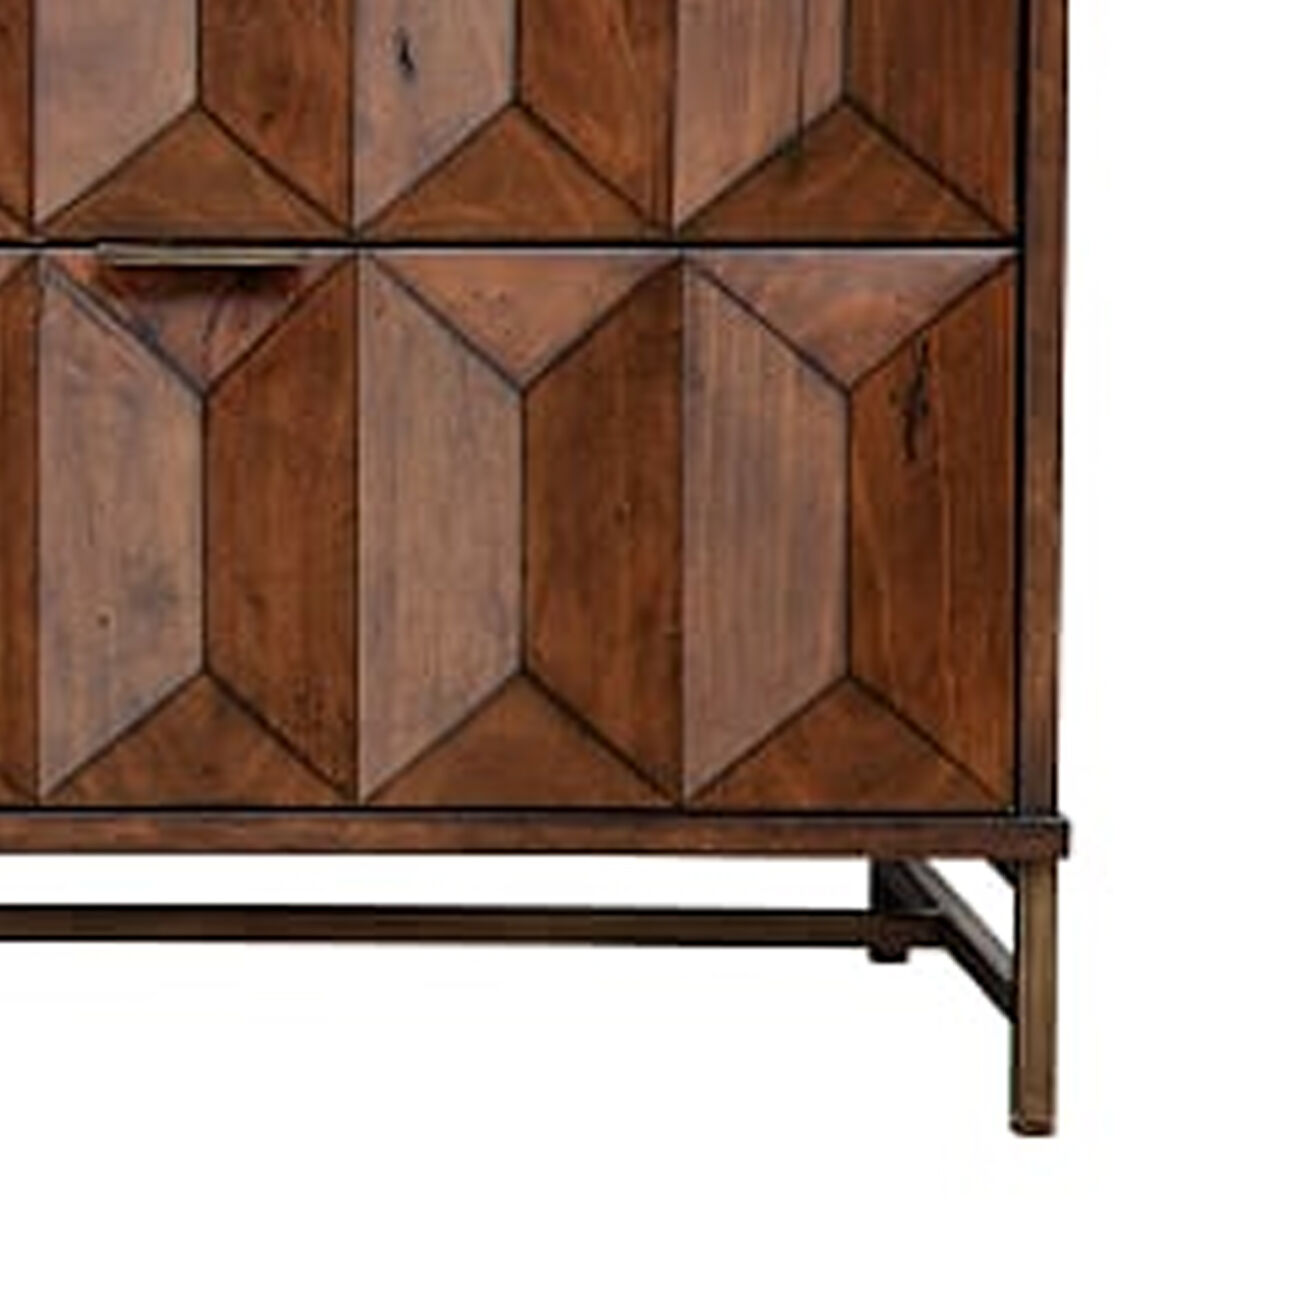 6 Drawer Dresser with Honeycomb Design and Metal Legs, Brown